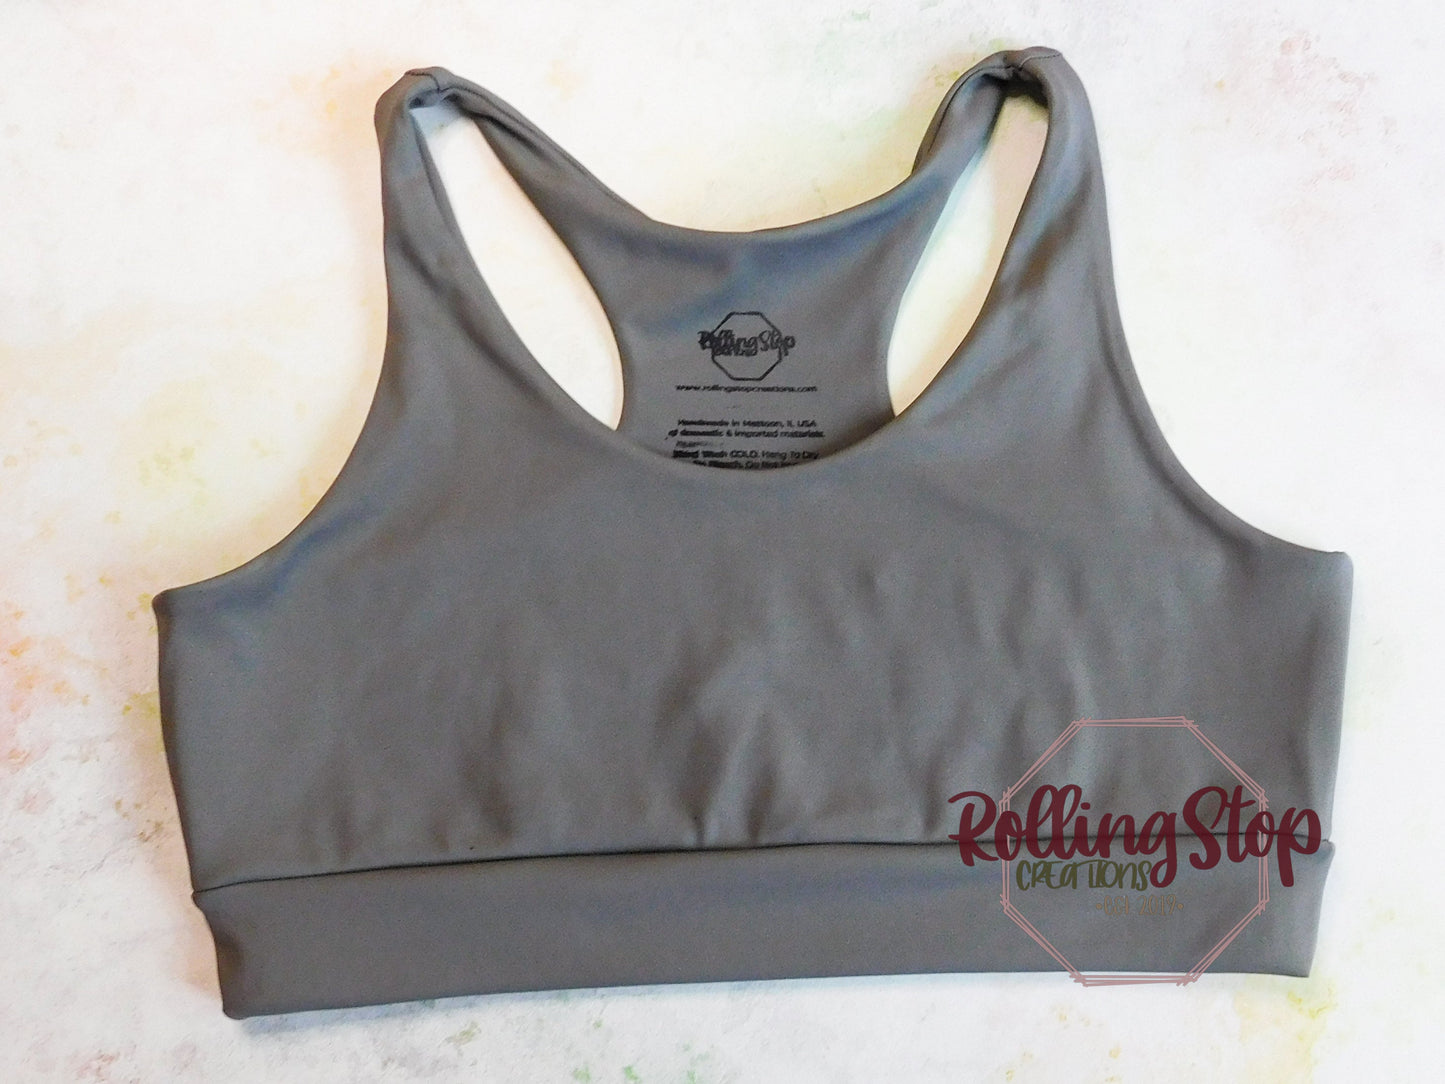 No Show Undies - Royal by Rolling Stop Creations sold by Rolling Stop Creations Athletic - Comfy Bra - Comfy Clothes